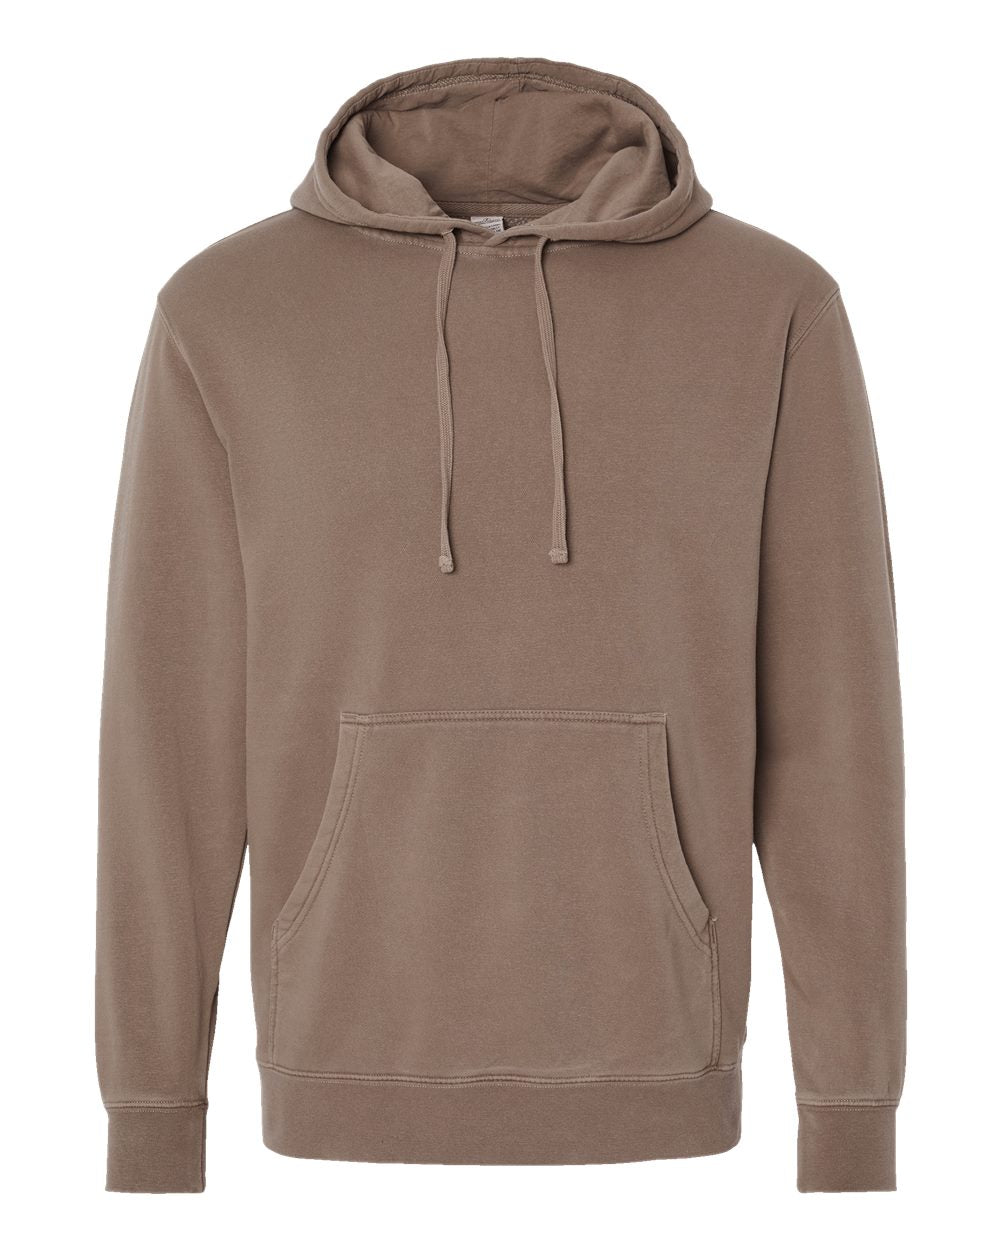 Independent Pigment-Dyed Hoodie (PRM4500) in Pigment Clay